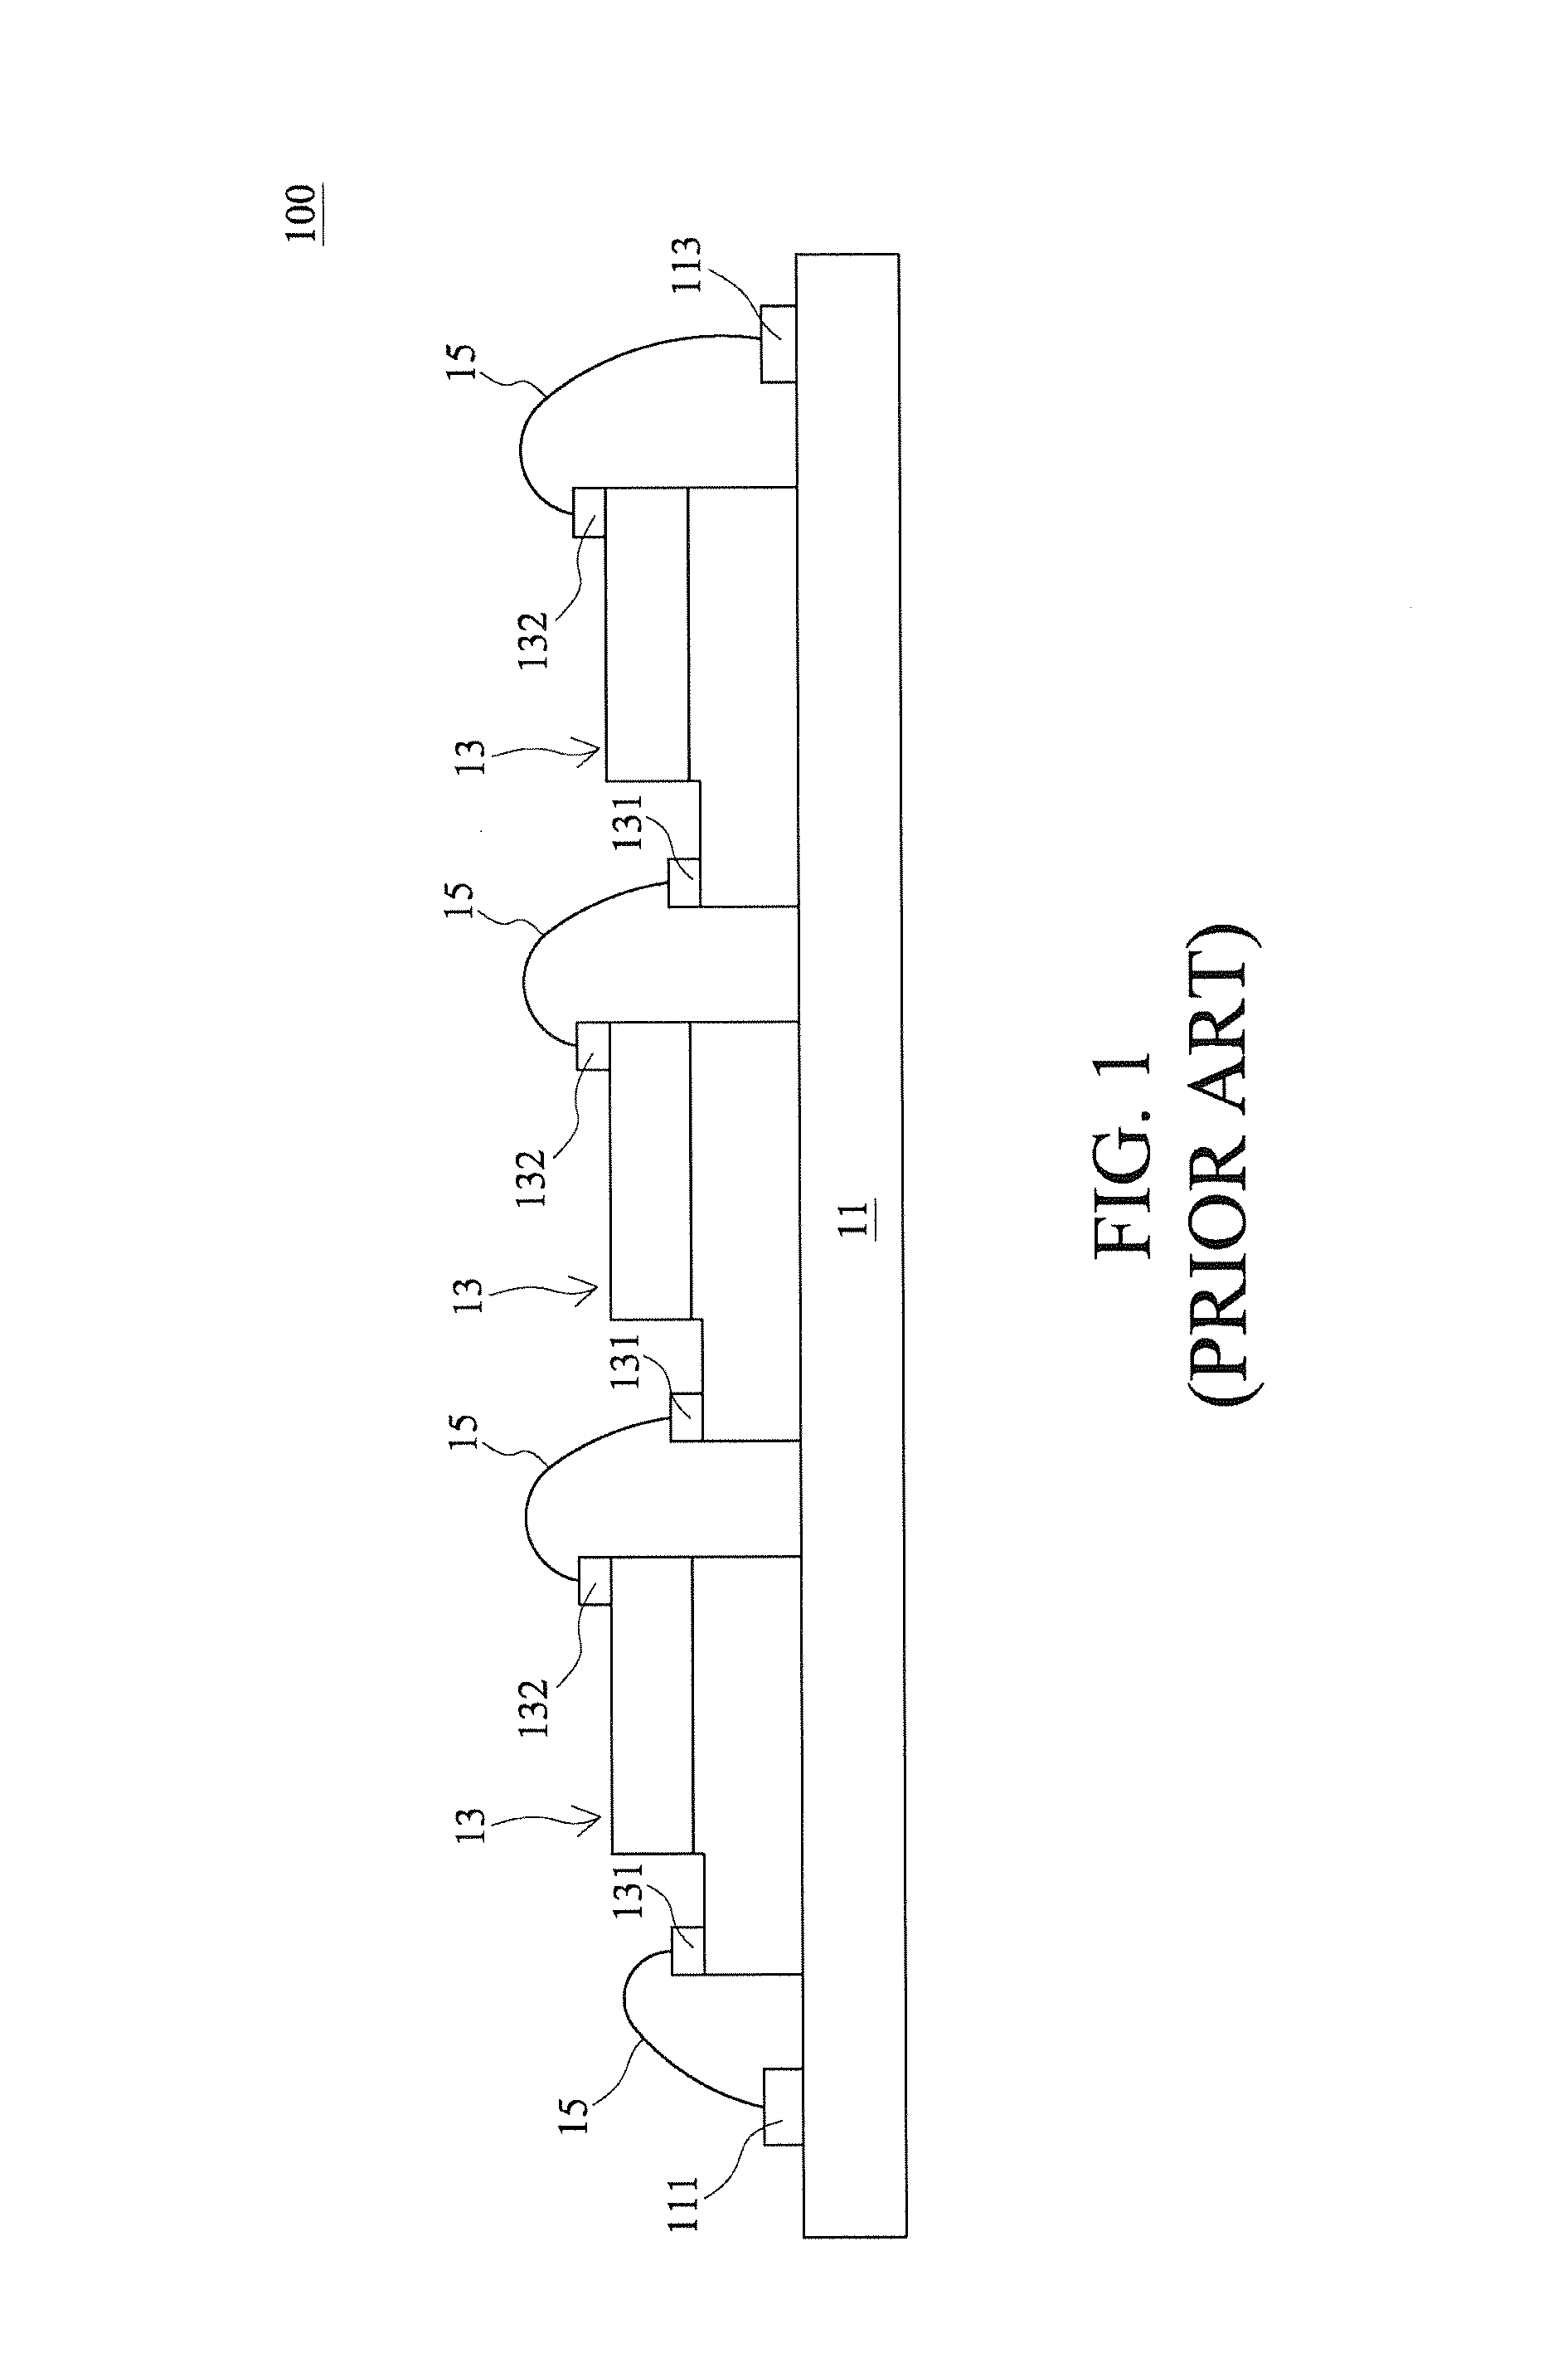 Stacked light emitting diode array structure